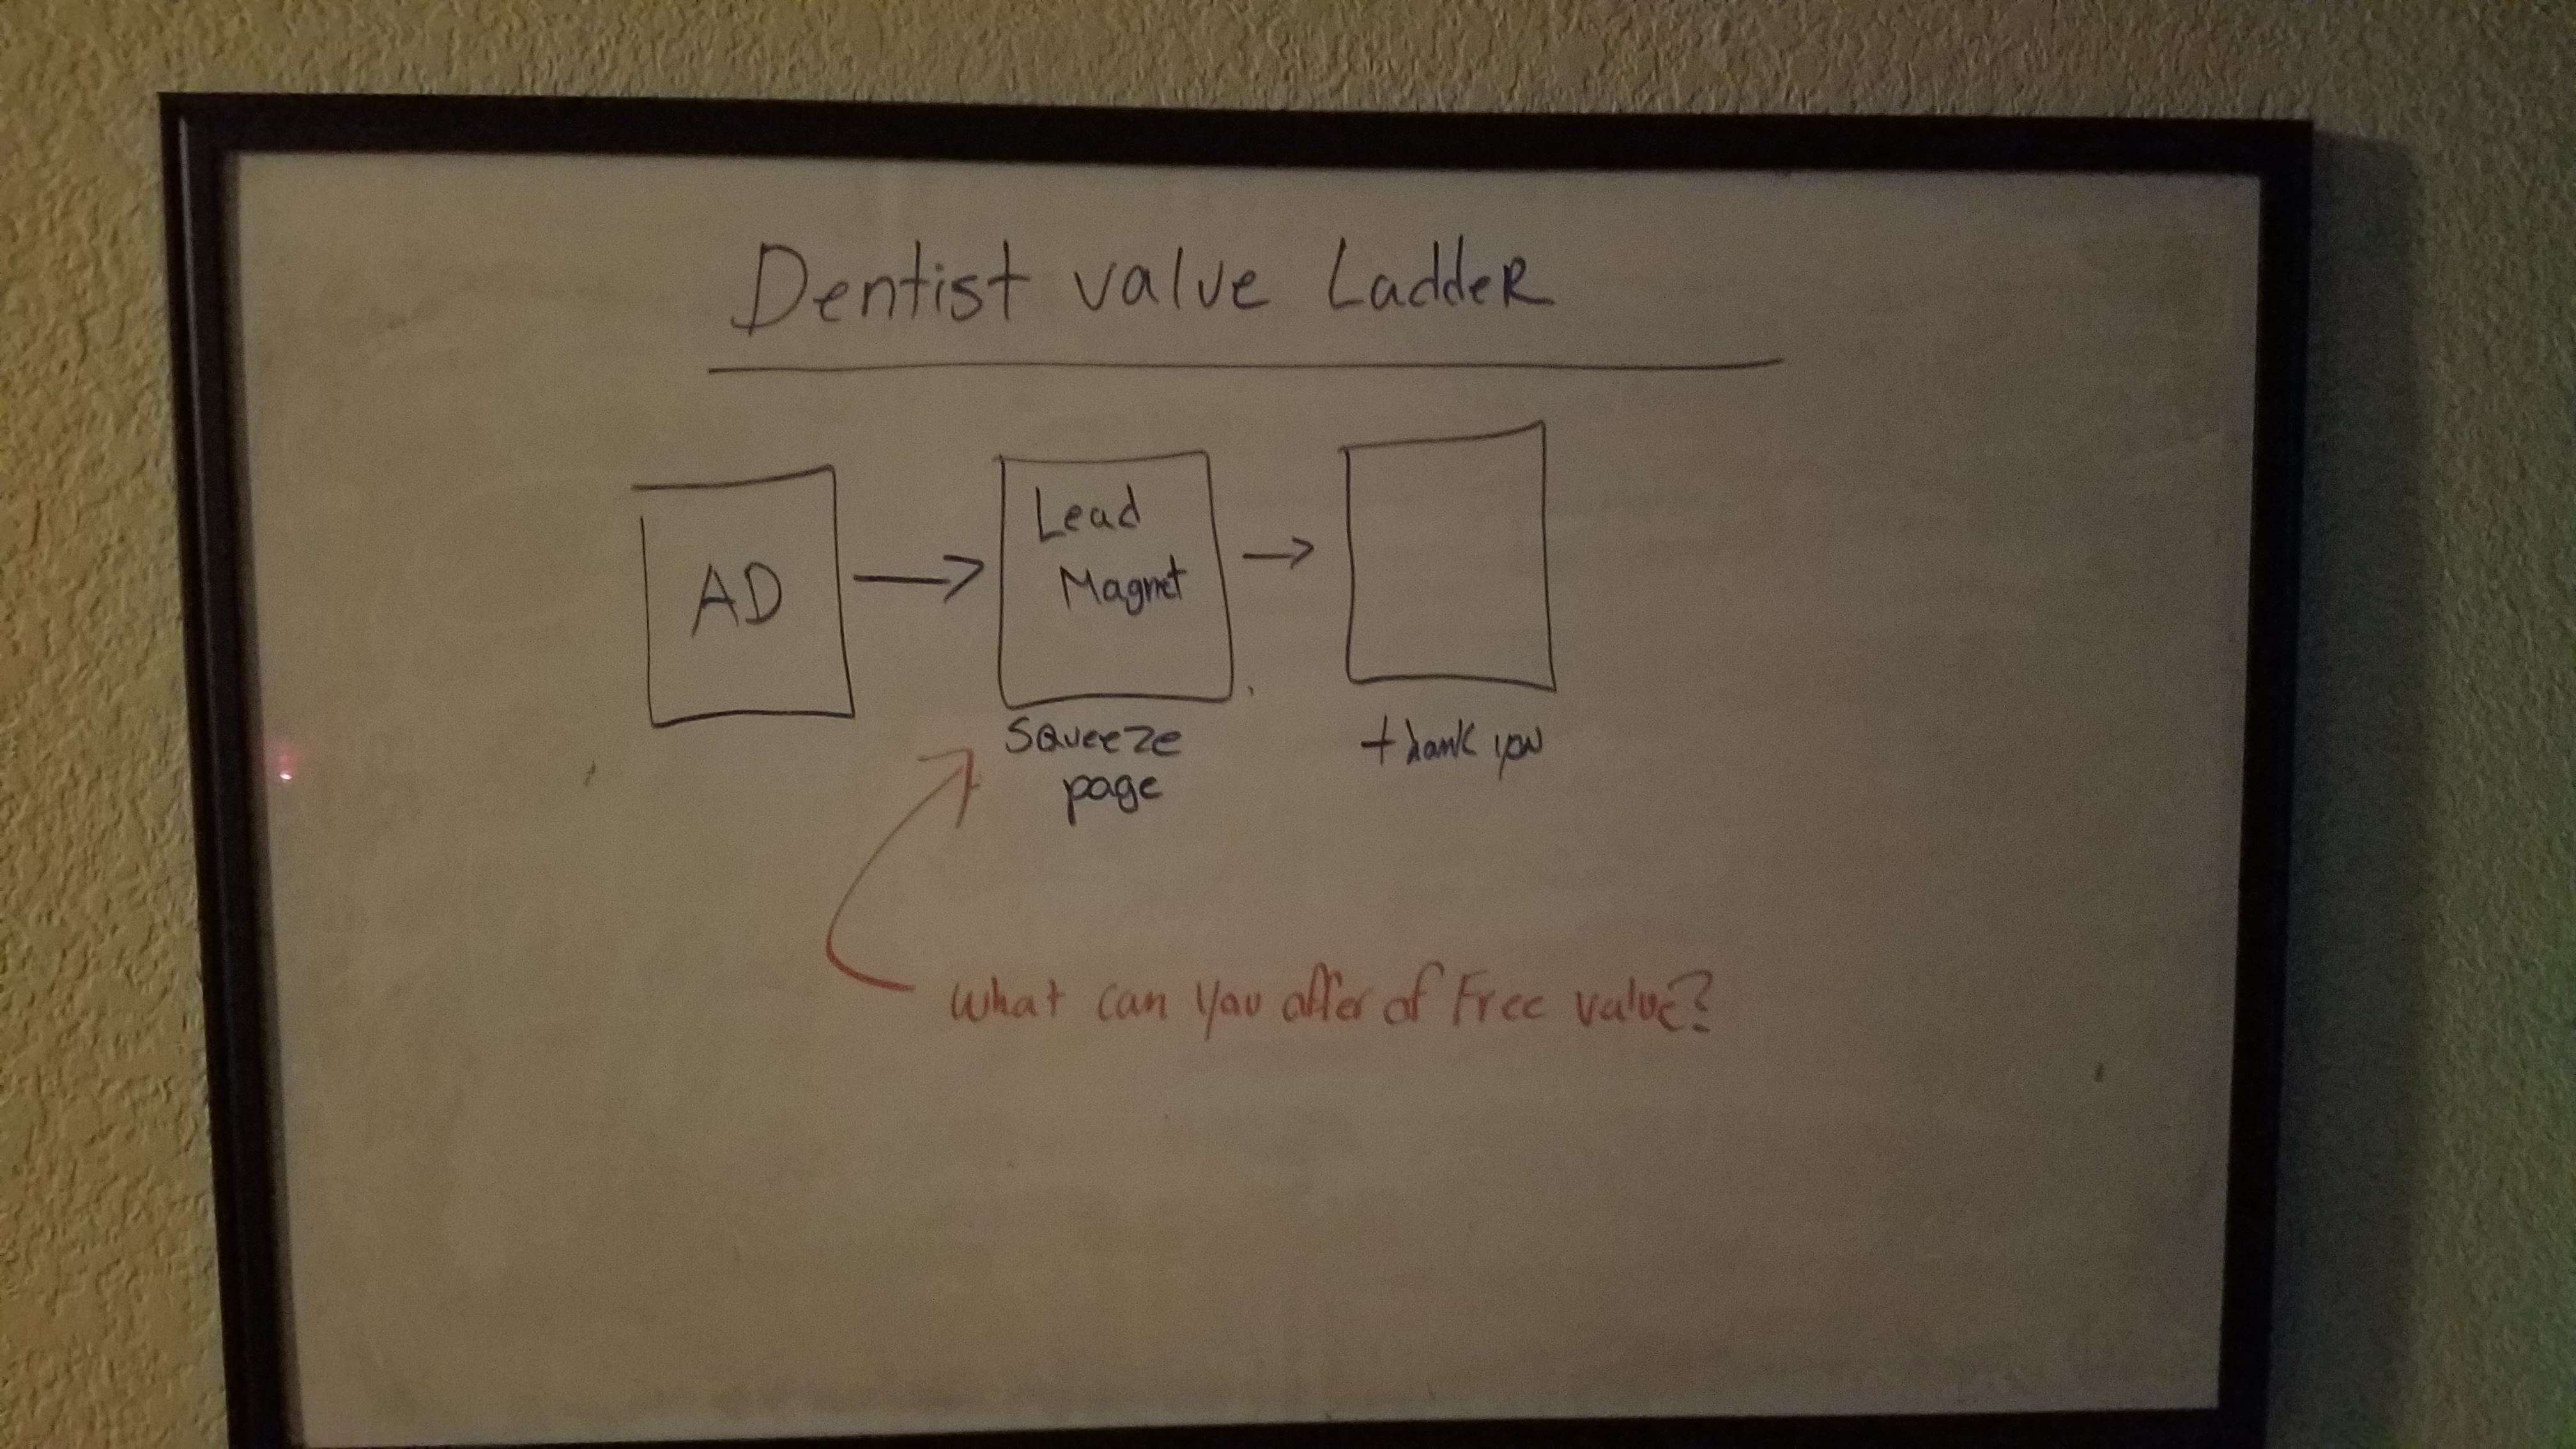 Free funnel builder software: photo of the dentist value ladder 